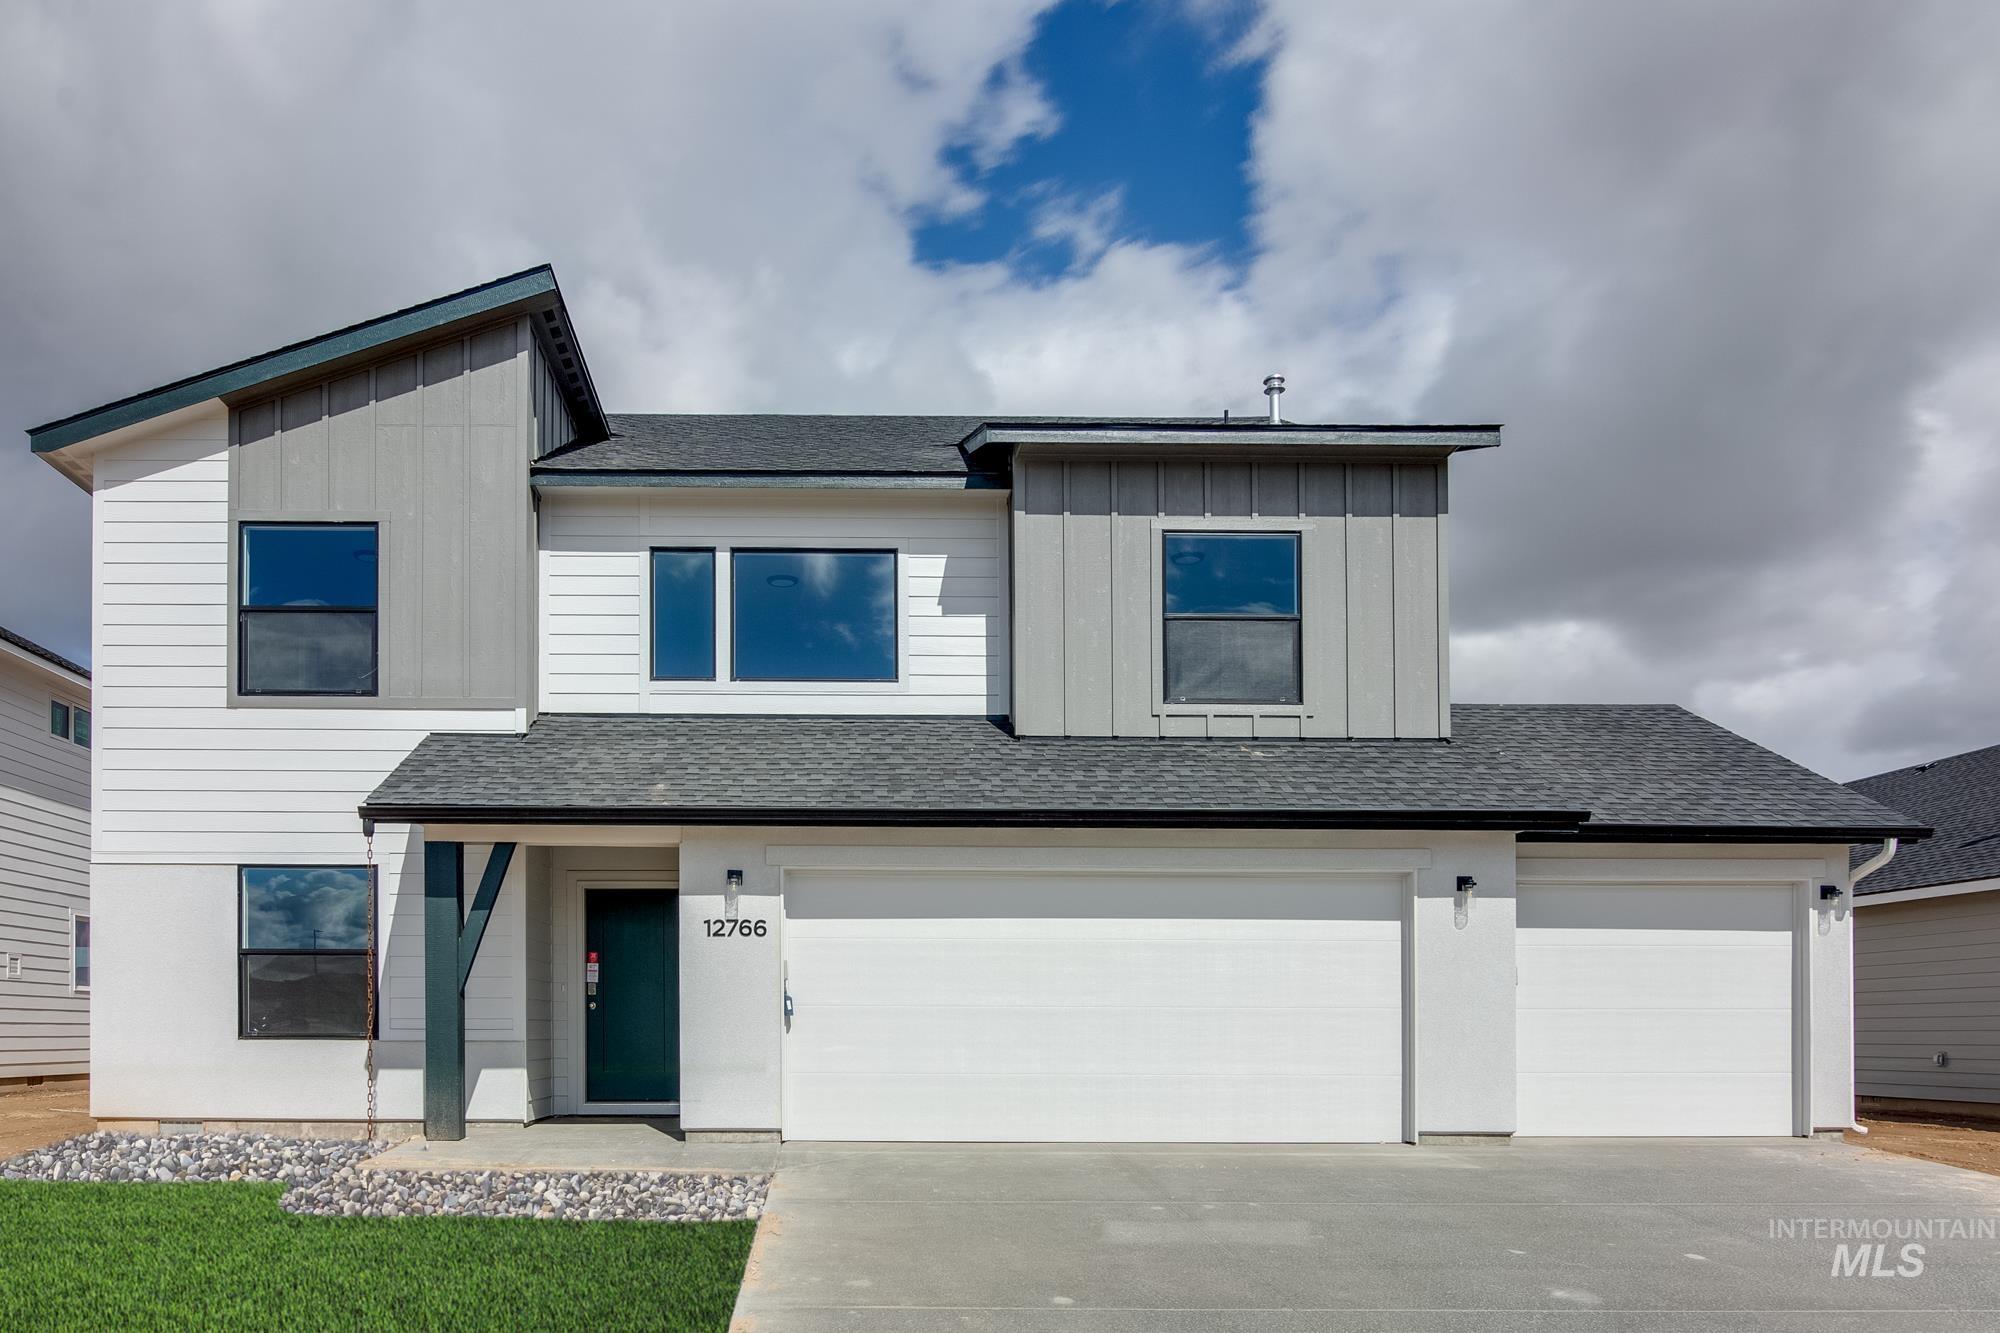 12766 Towhee St, Nampa, Idaho 83651, 4 Bedrooms, 2.5 Bathrooms, Residential For Sale, Price $441,990,MLS 98901407